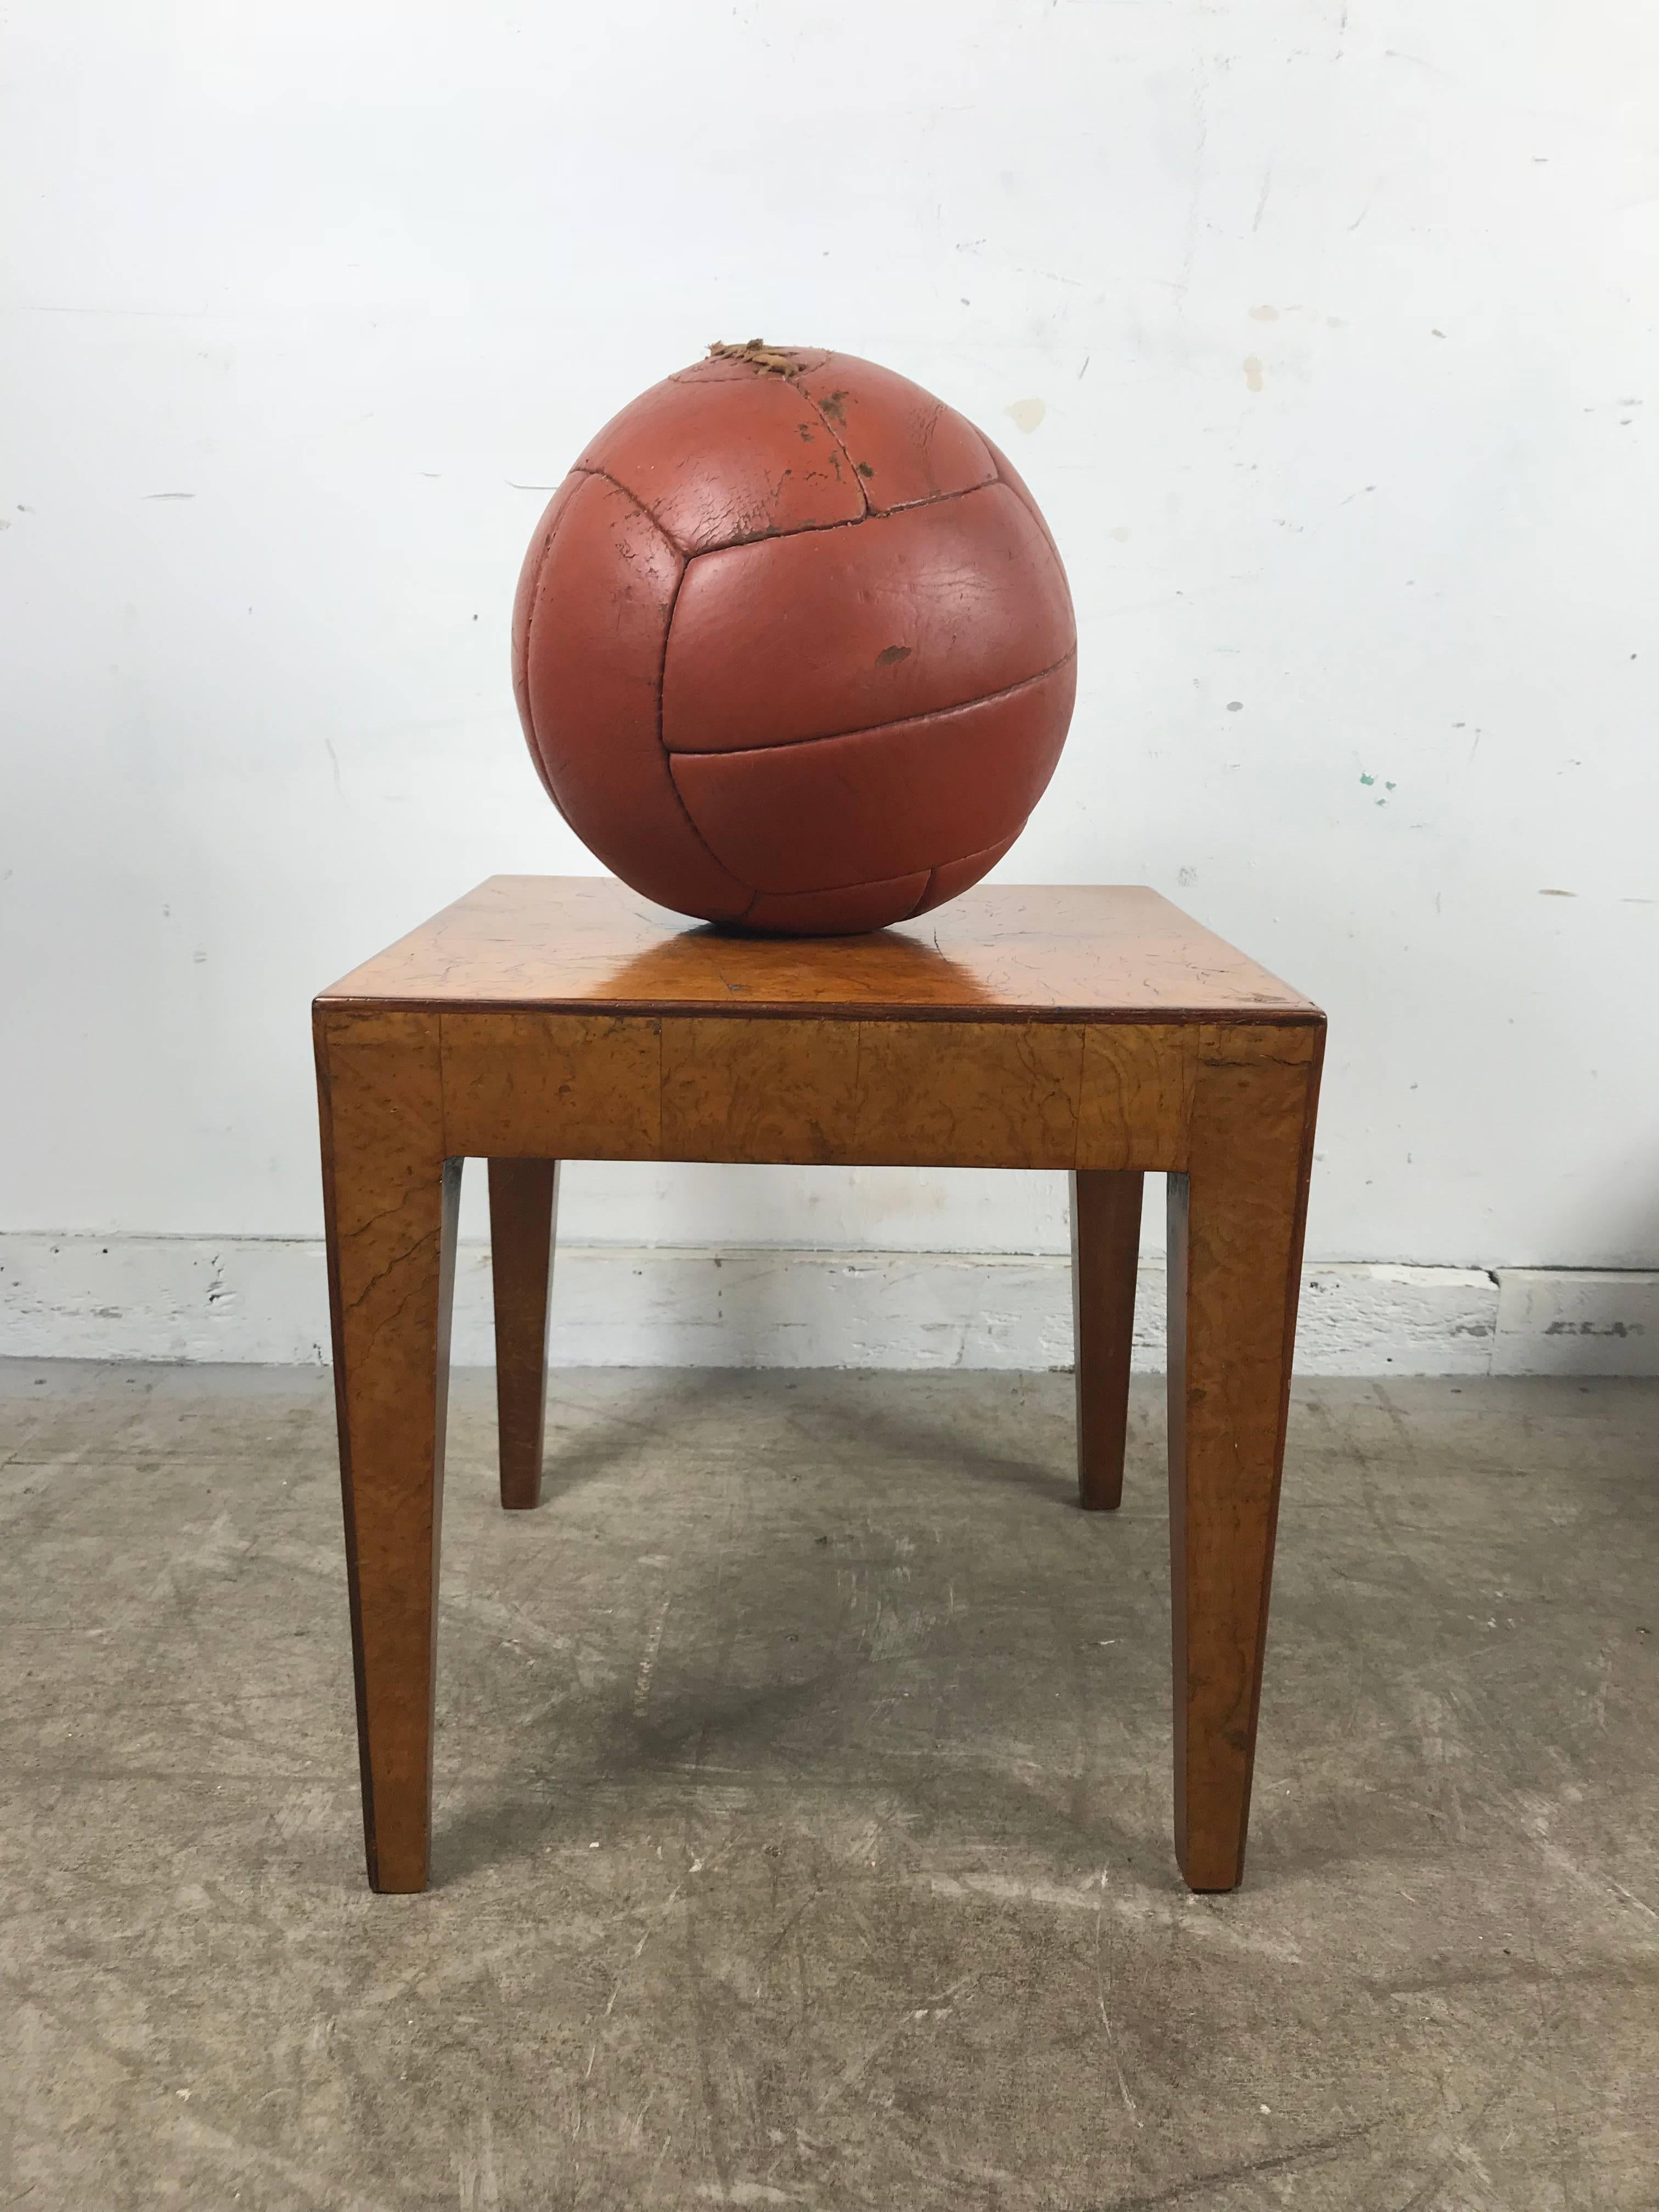 1930s Leather Medicine Ball, Nice Color and Patina In Distressed Condition For Sale In Buffalo, NY